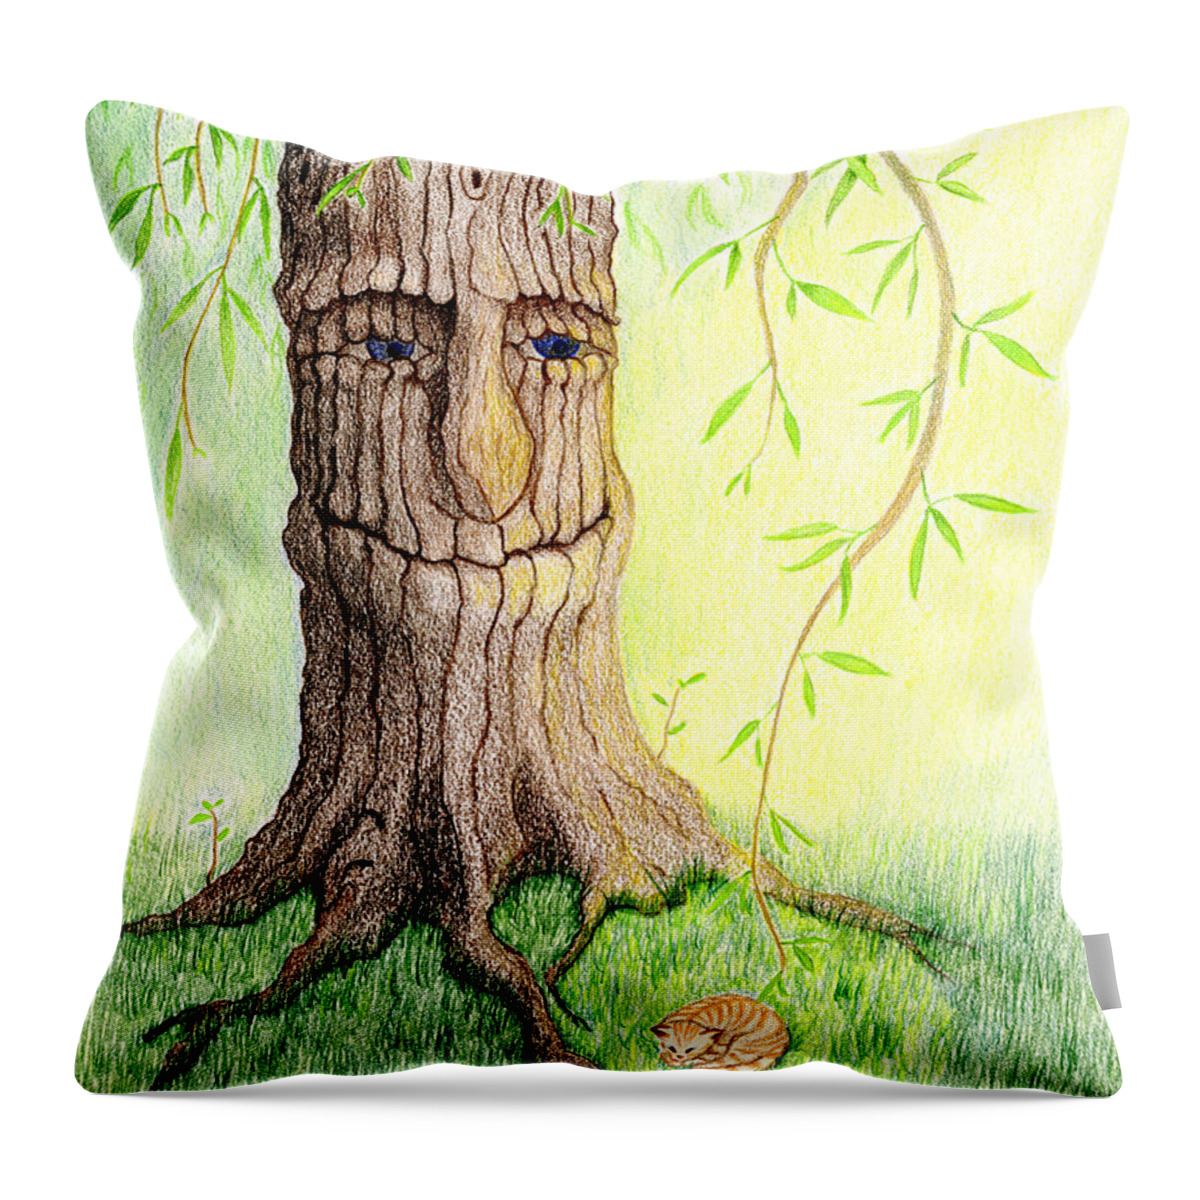 Ginger Kitten Throw Pillow featuring the drawing Cat and Great Mother Tree by Keiko Katsuta